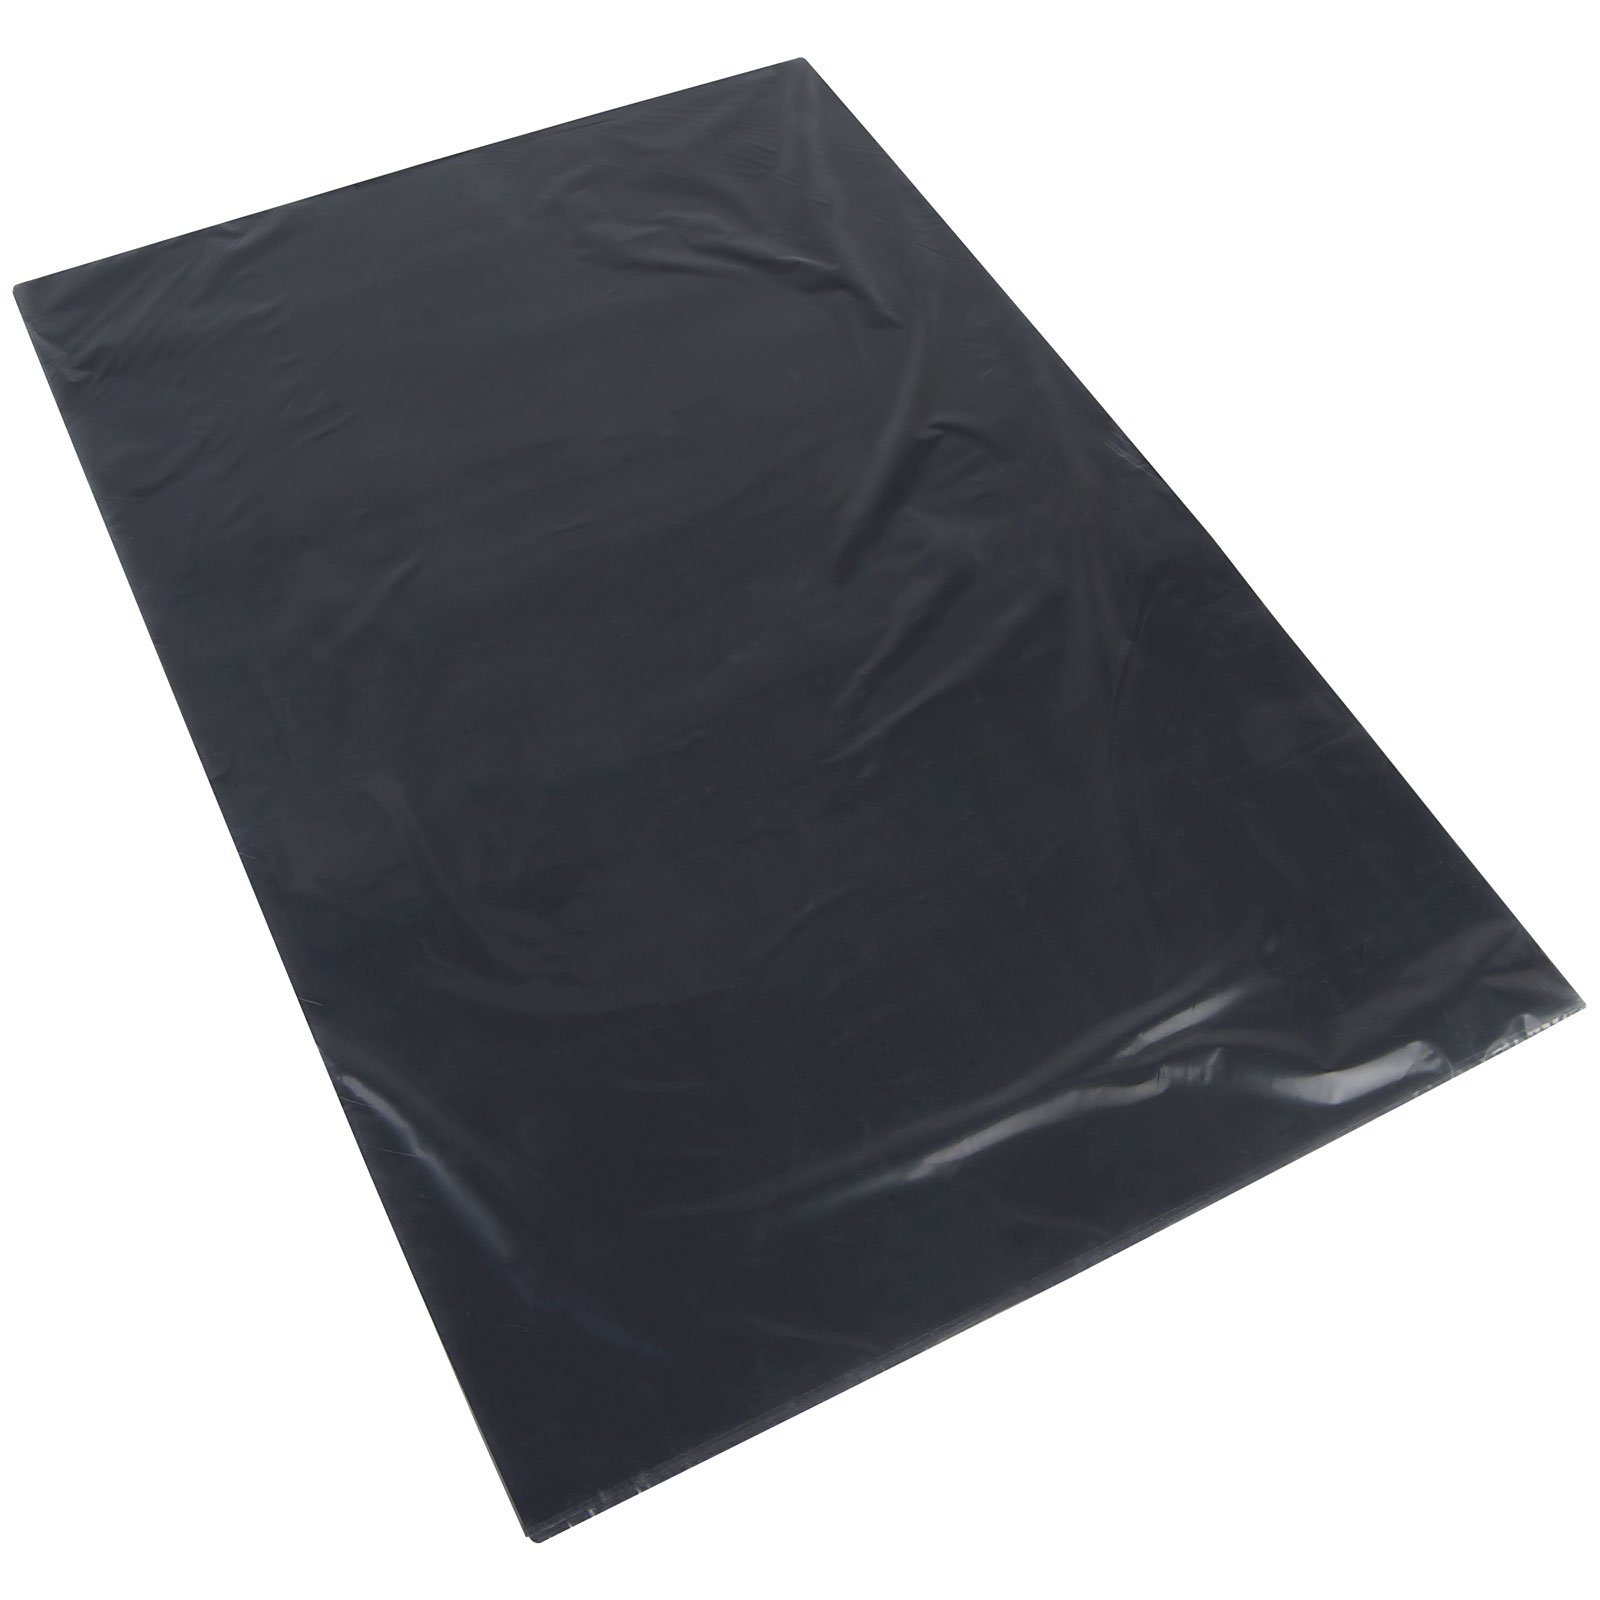 Rapid Poster Paper Sheets Black - Pack of 25 760 x 510mm 95gsm | Rapid ...